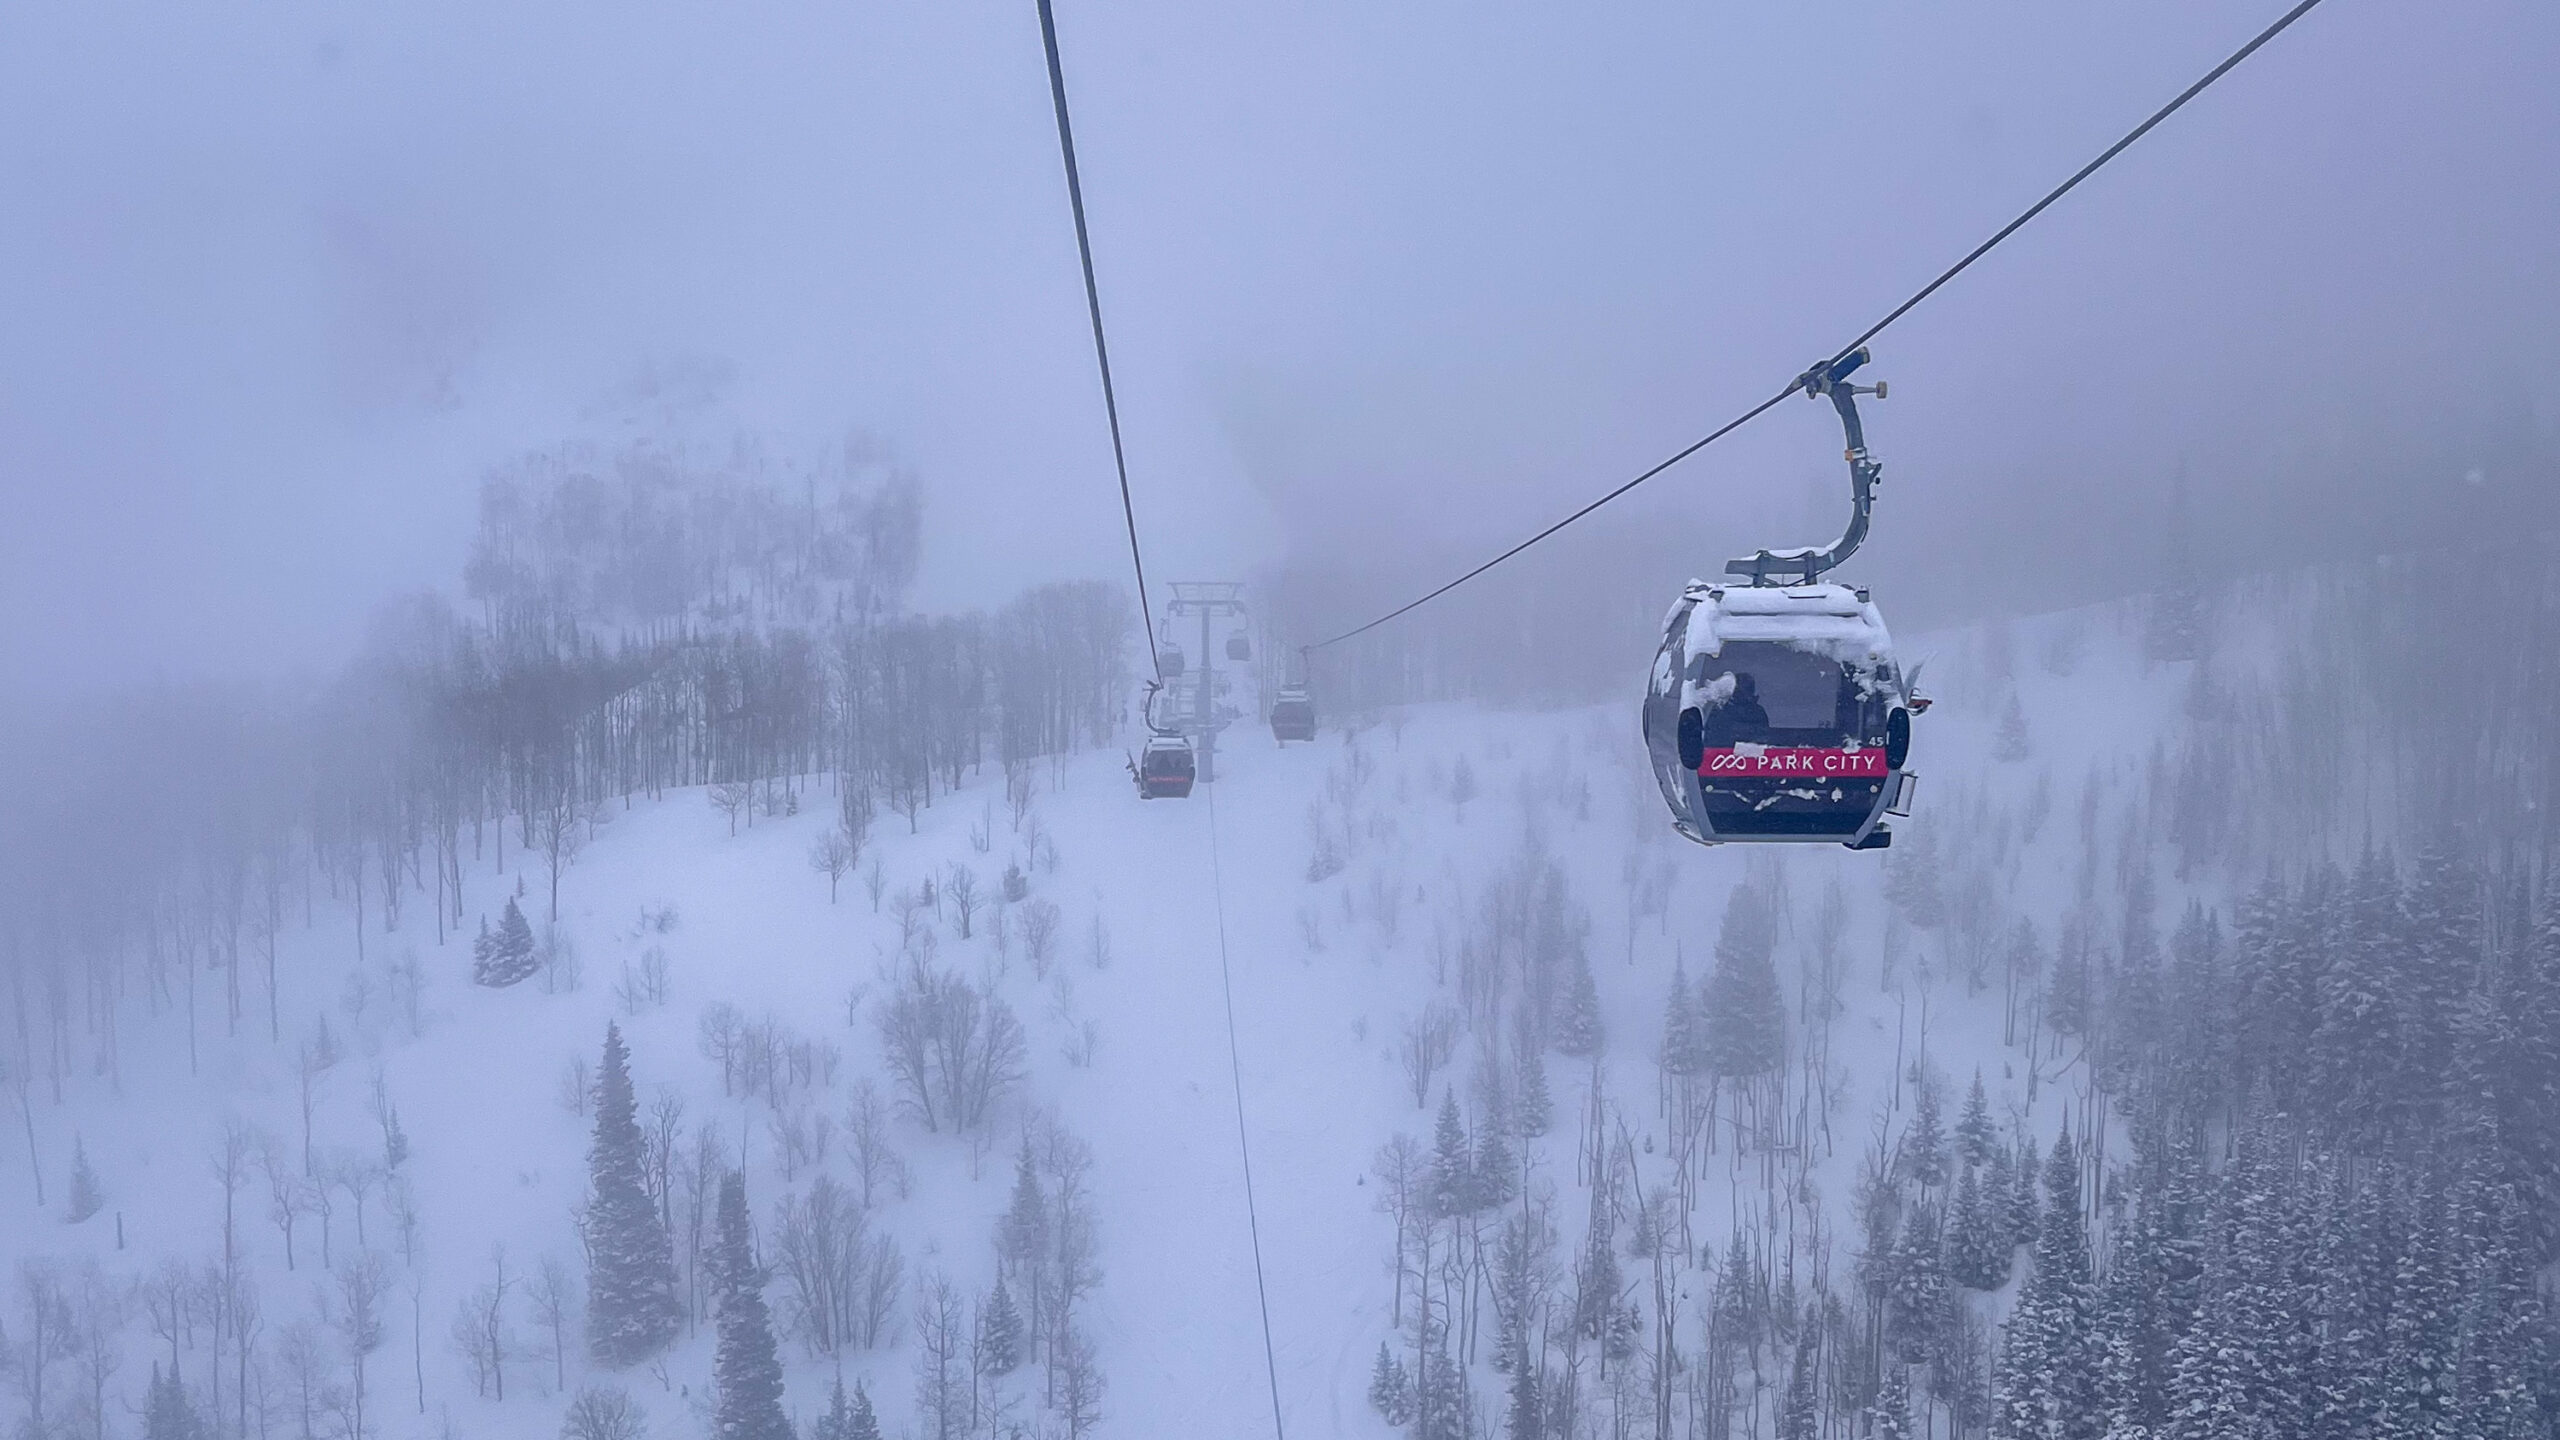 Quicksilver gondola cabins travel along a cable on a snowy day at Park City Mountain Resort....